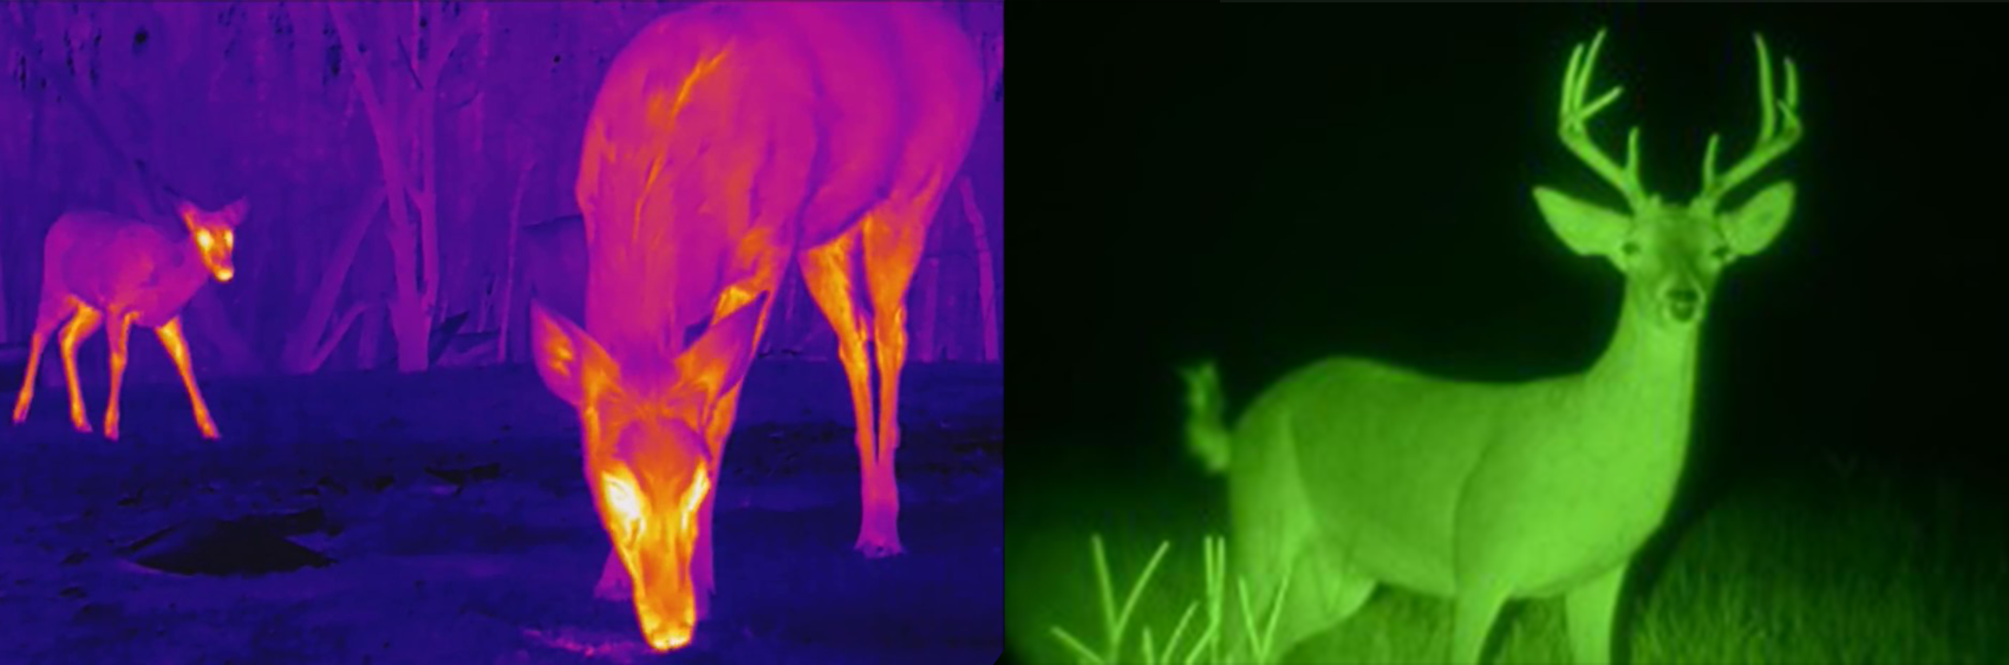 Night Vision vs. Thermal Imaging: Understanding the Differences